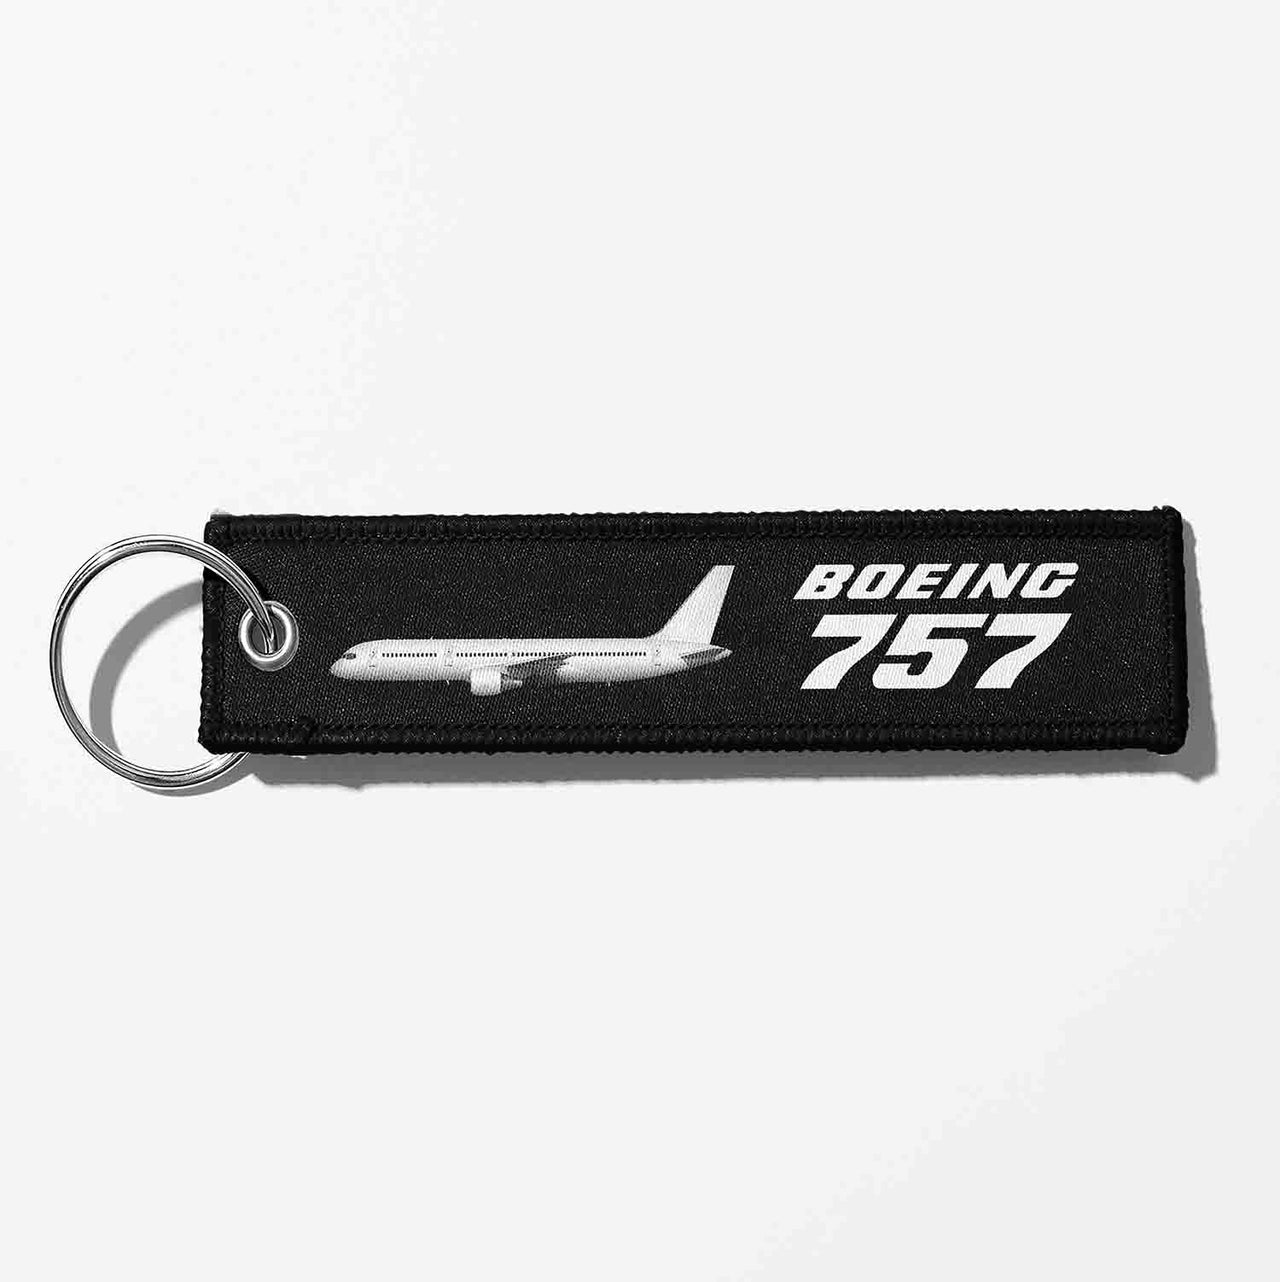 The Boeing 757 Designed Key Chains